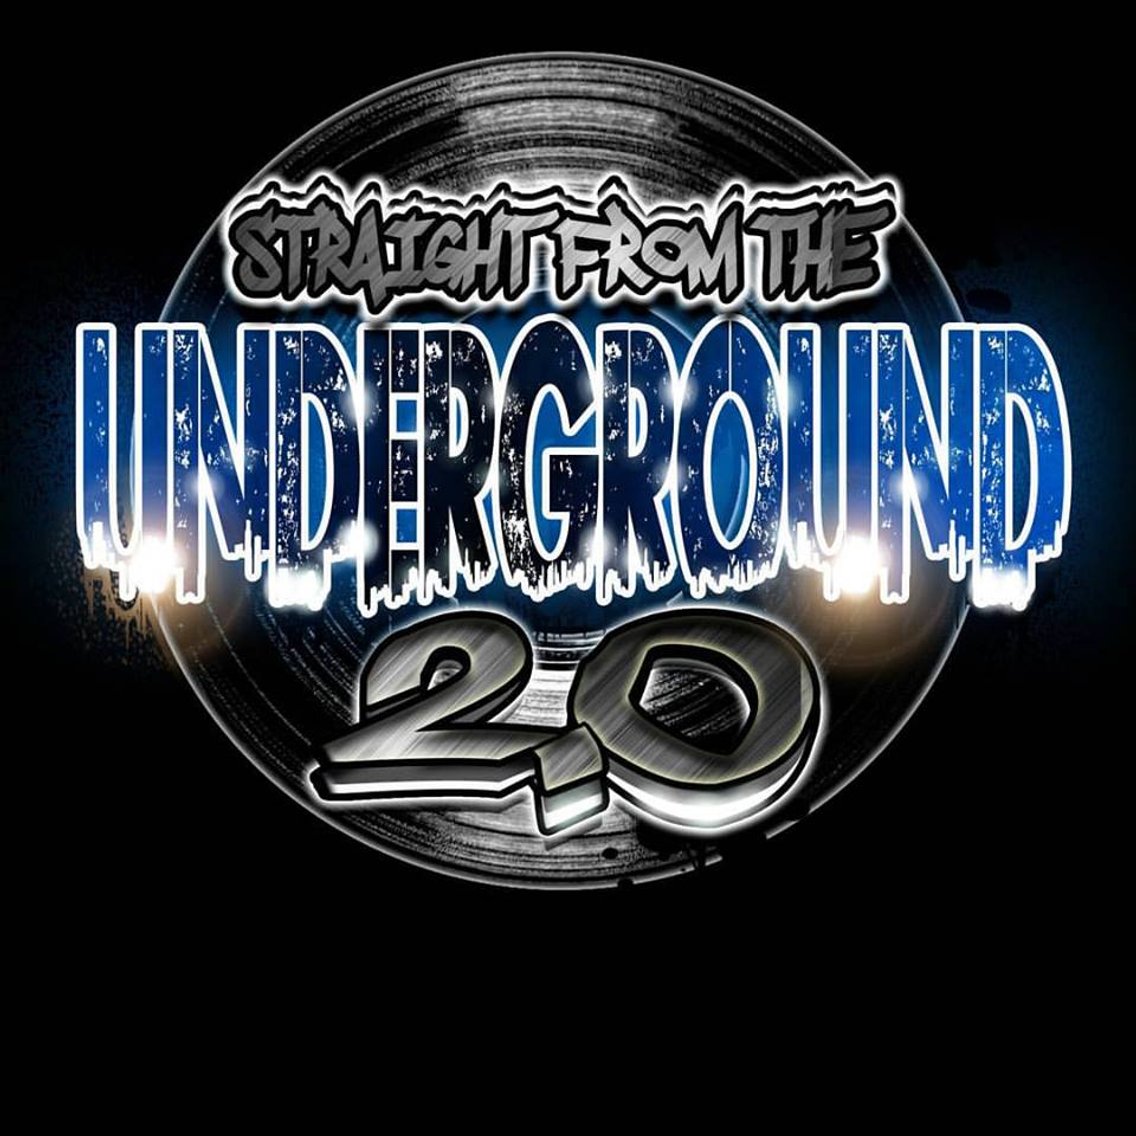 Straight from the Underground 2.0 - Cover Image